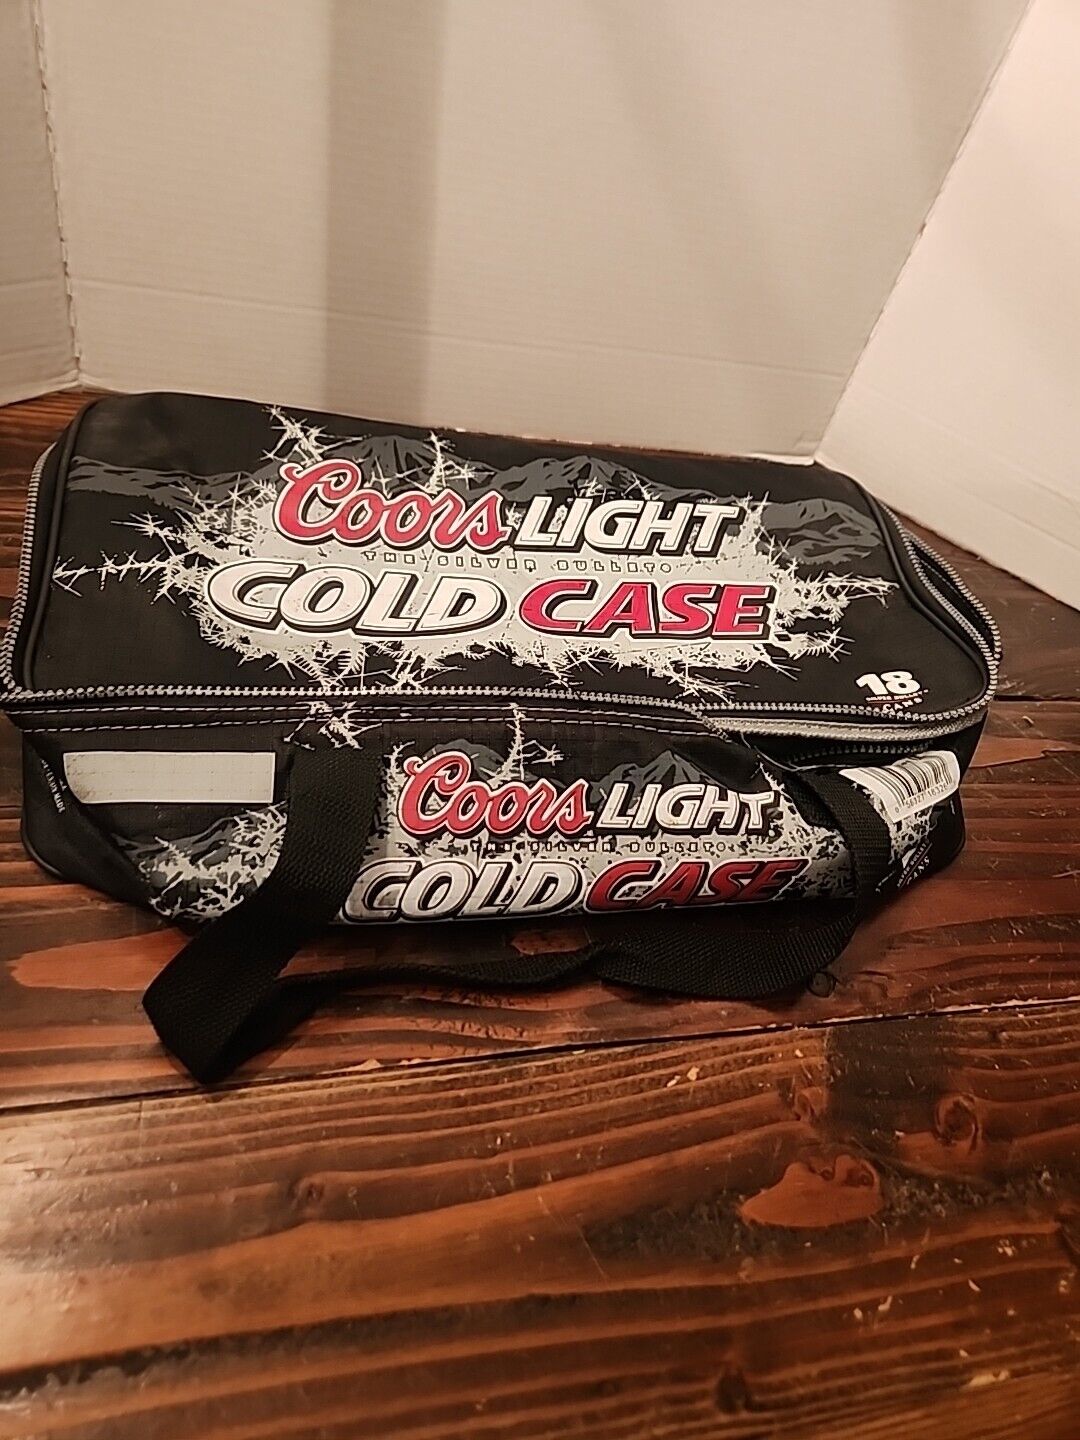 RARE Coors Light The Silver Bullet Insulated Cooler Bag Cold Case 18 Beer cans